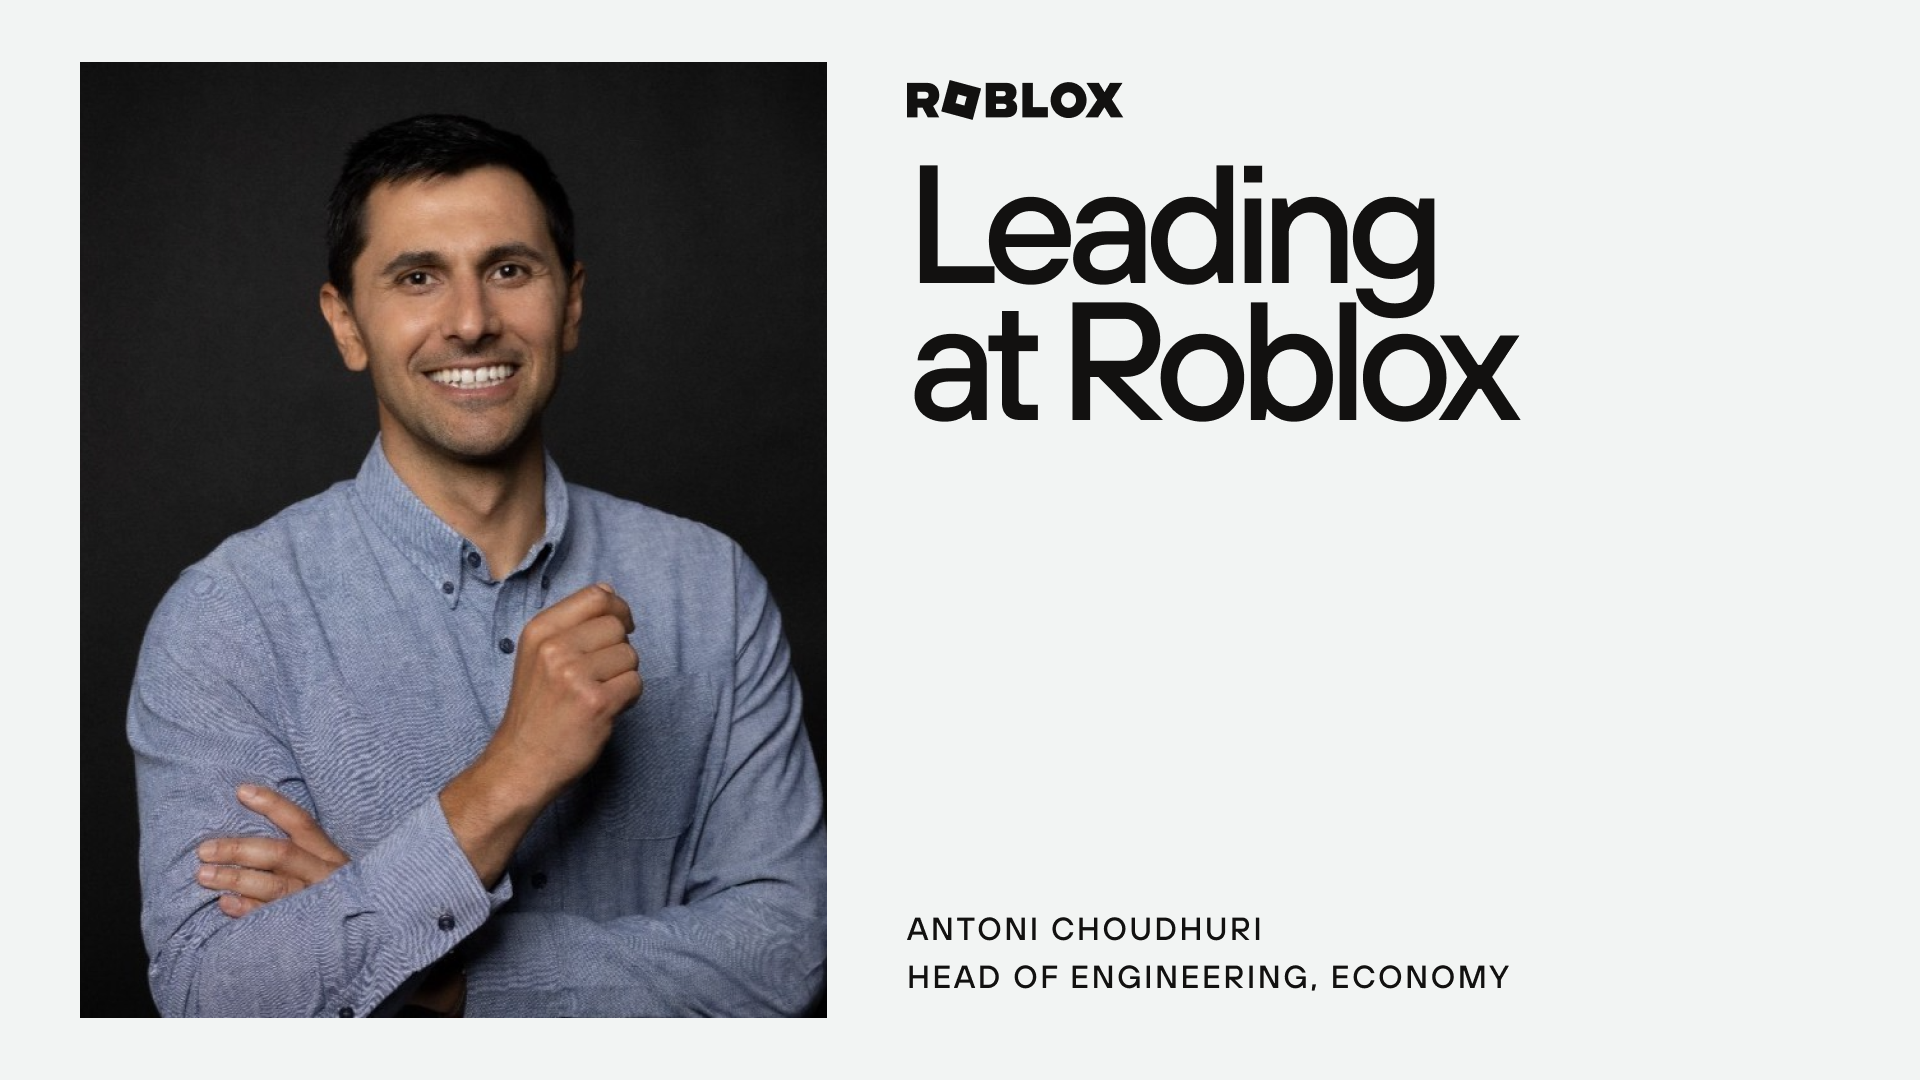 In this Leading at Roblox profile, we get to know Antoni Choudhuri, Head of Engineering for our Economy Group. Antoni has been at Roblox for nearly 11 years, growing from an Individual Contributor Software Engineer to Head of Economy Engineering. In this article, he reflects on his tenure at Roblox and reveals key insights into ...